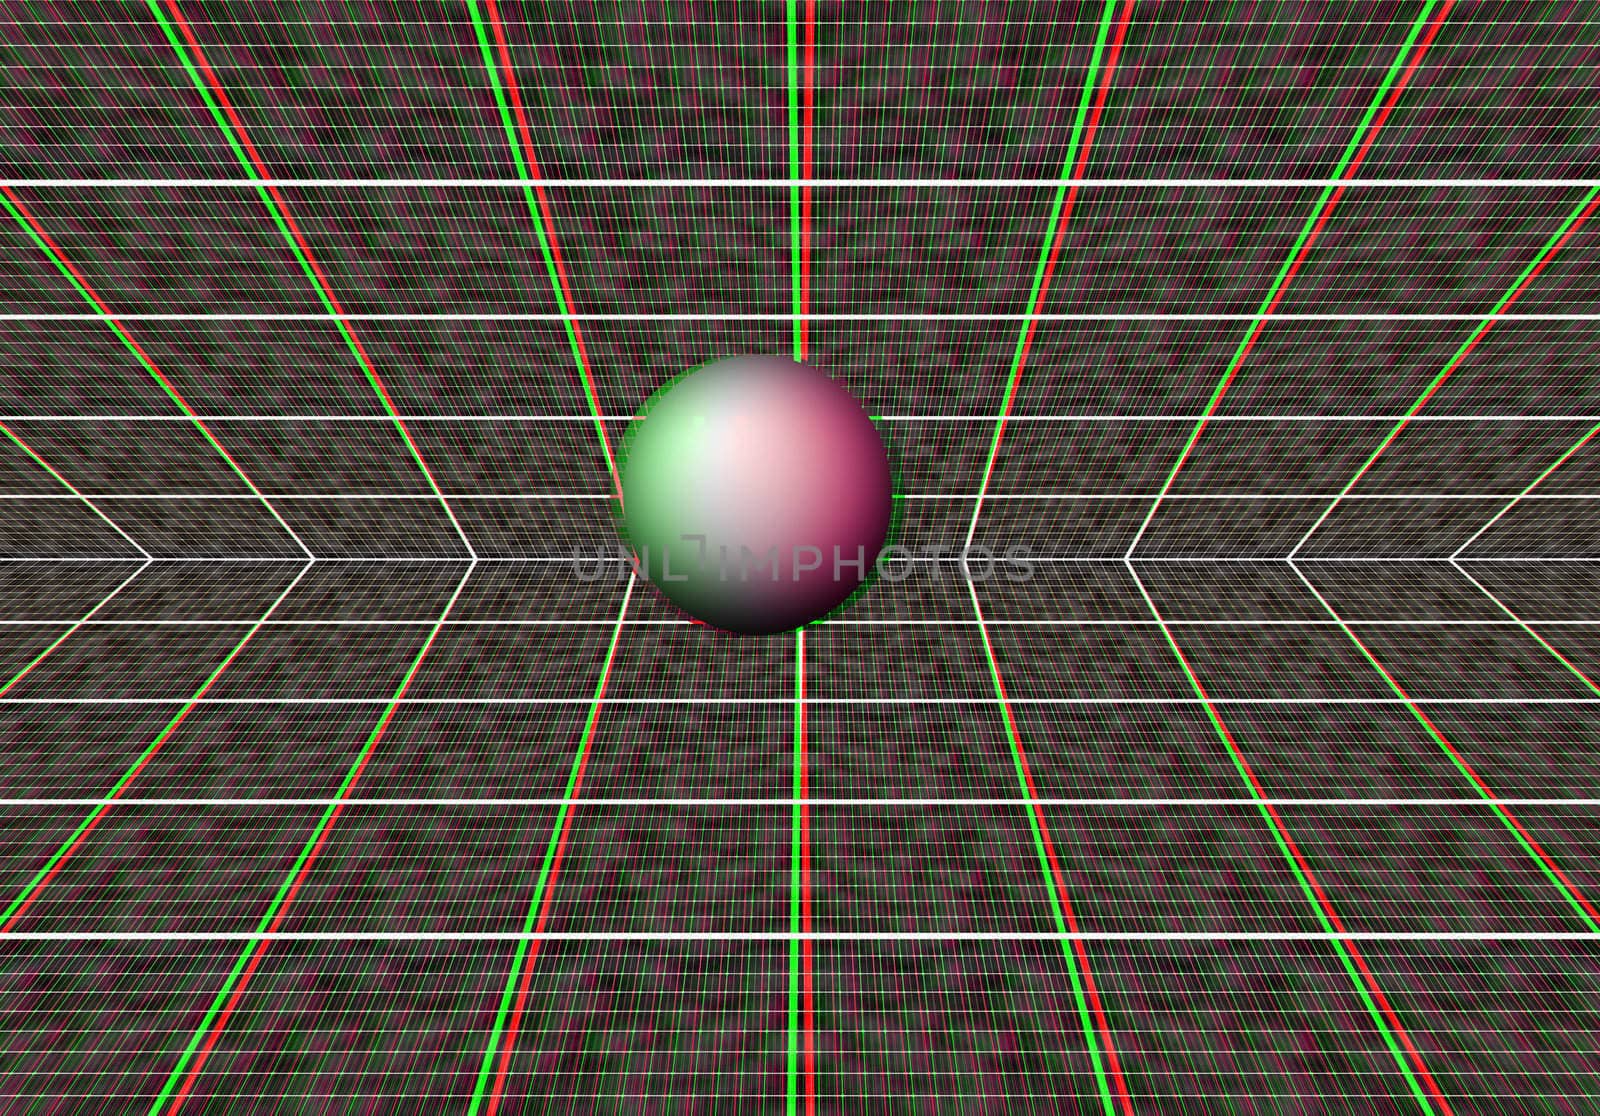 An illustration of a anaglyph 3d image